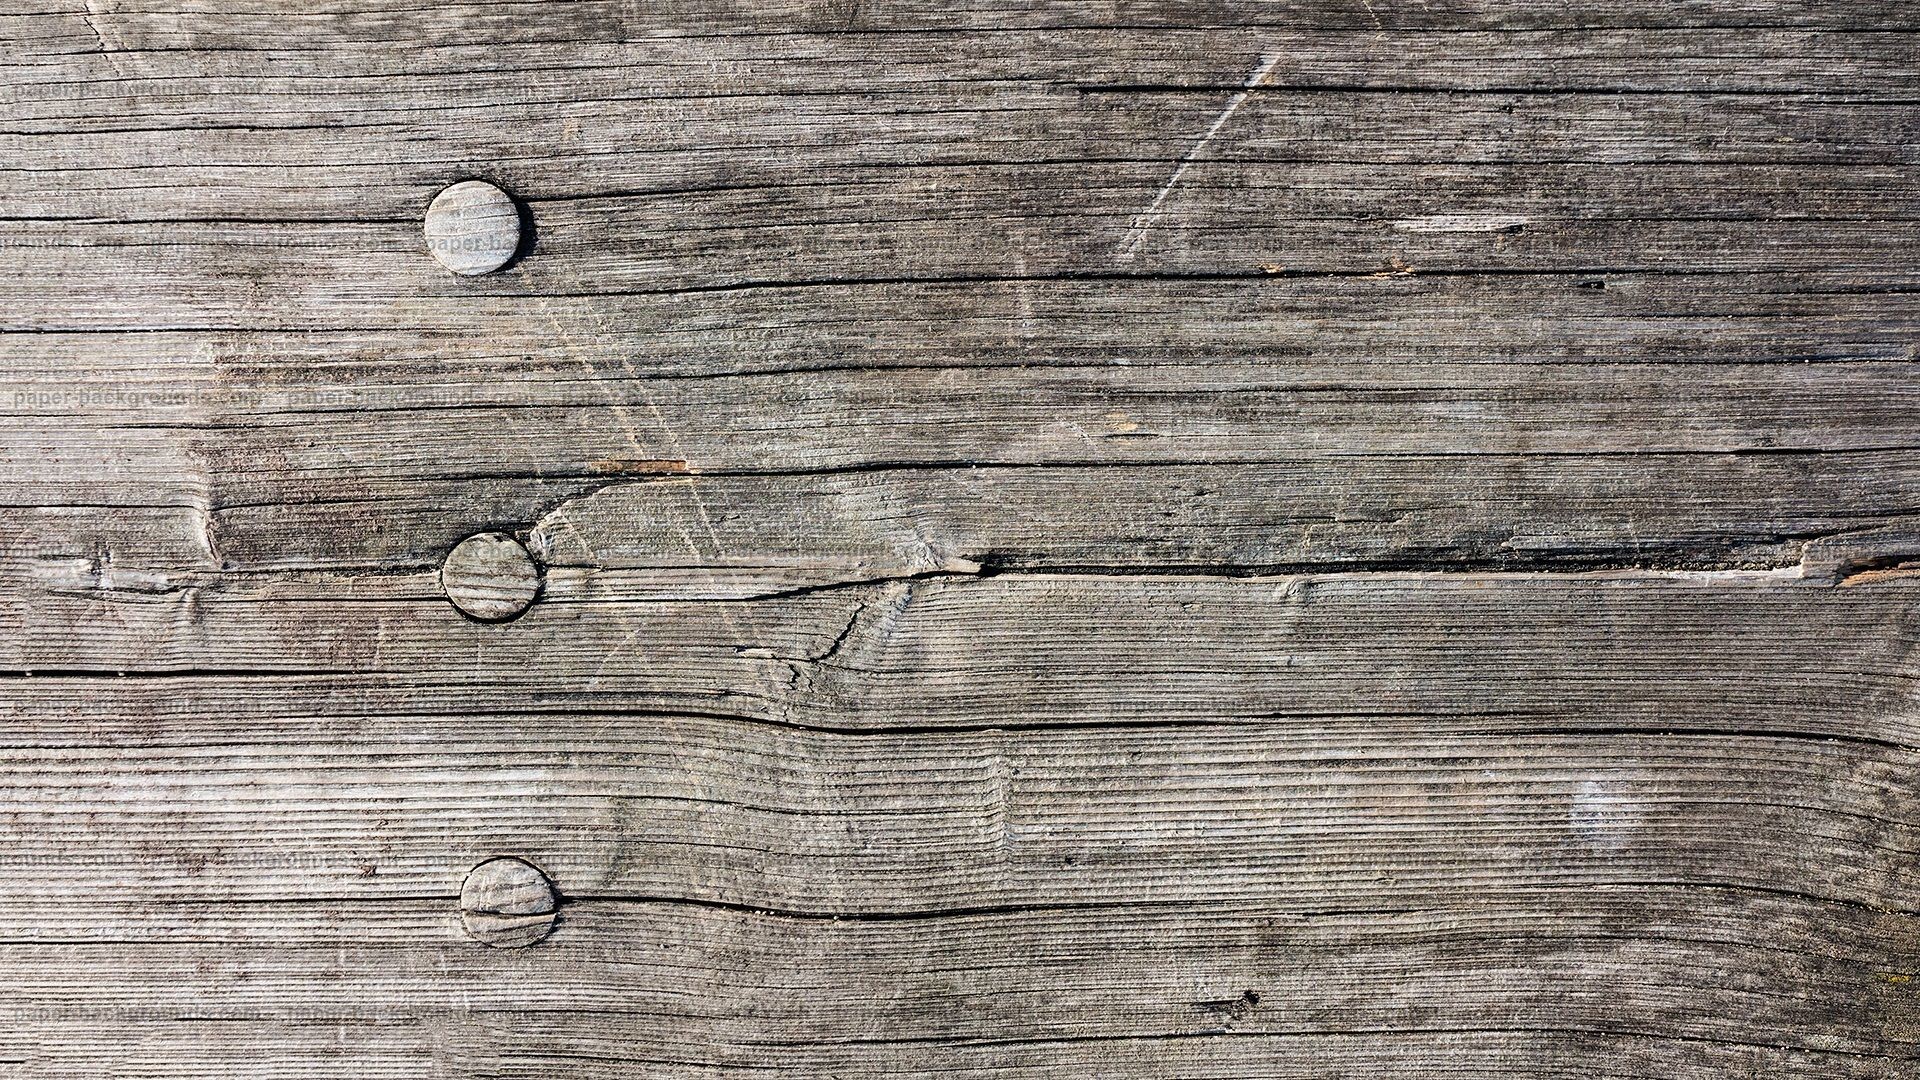 1920x1080 Old Wood Plank Wallpaper, Old Wood Plank Wallpapers For Free .